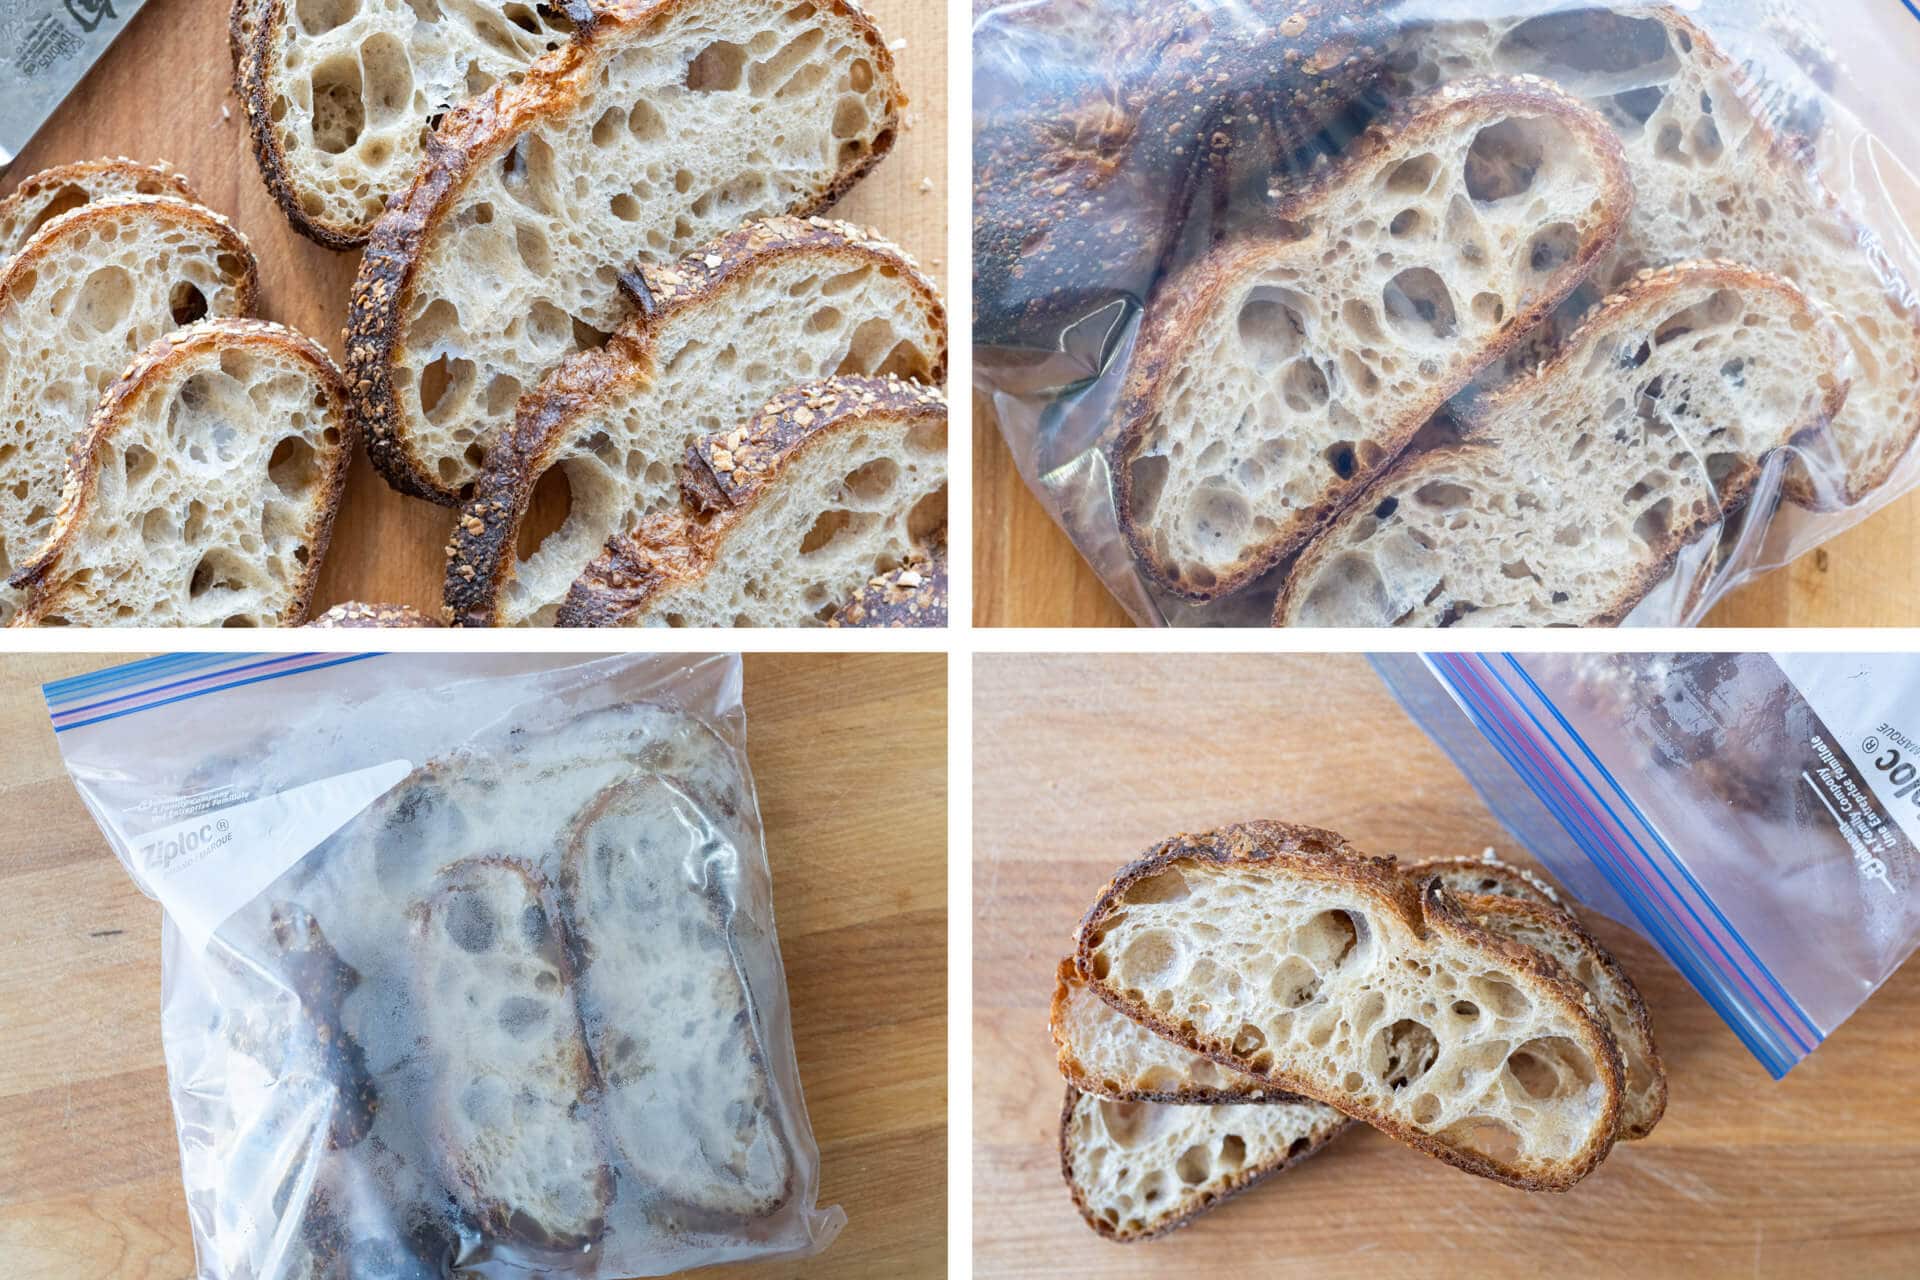 https://www.theperfectloaf.com/wp-content/uploads/2020/03/theperfectloaf-how-to-store-bread-freezing-bread.jpg